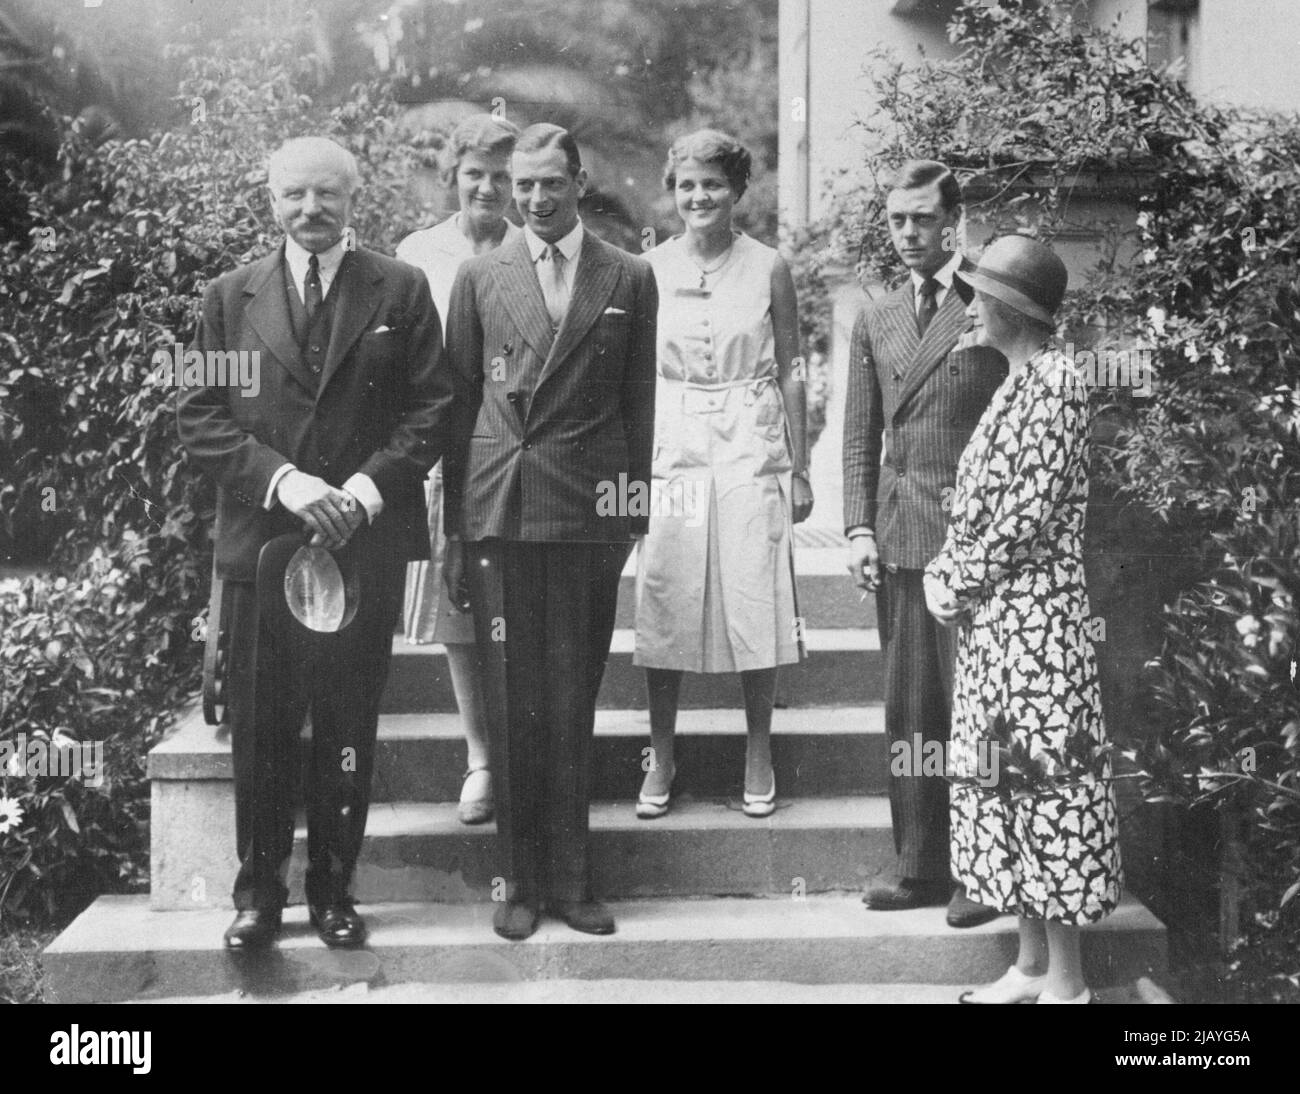 Wales Welcomed at Santiago: The Prince of Wales, Prince George at the British Embassy in Santiago, Chile. Left to right are: Ambassador Chinon, Prince George, Prince of Wales, Lady Chilton in rear, the Ambassador's two daughters. April 3, 1931. (Photo by Acme Photo). Stock Photo